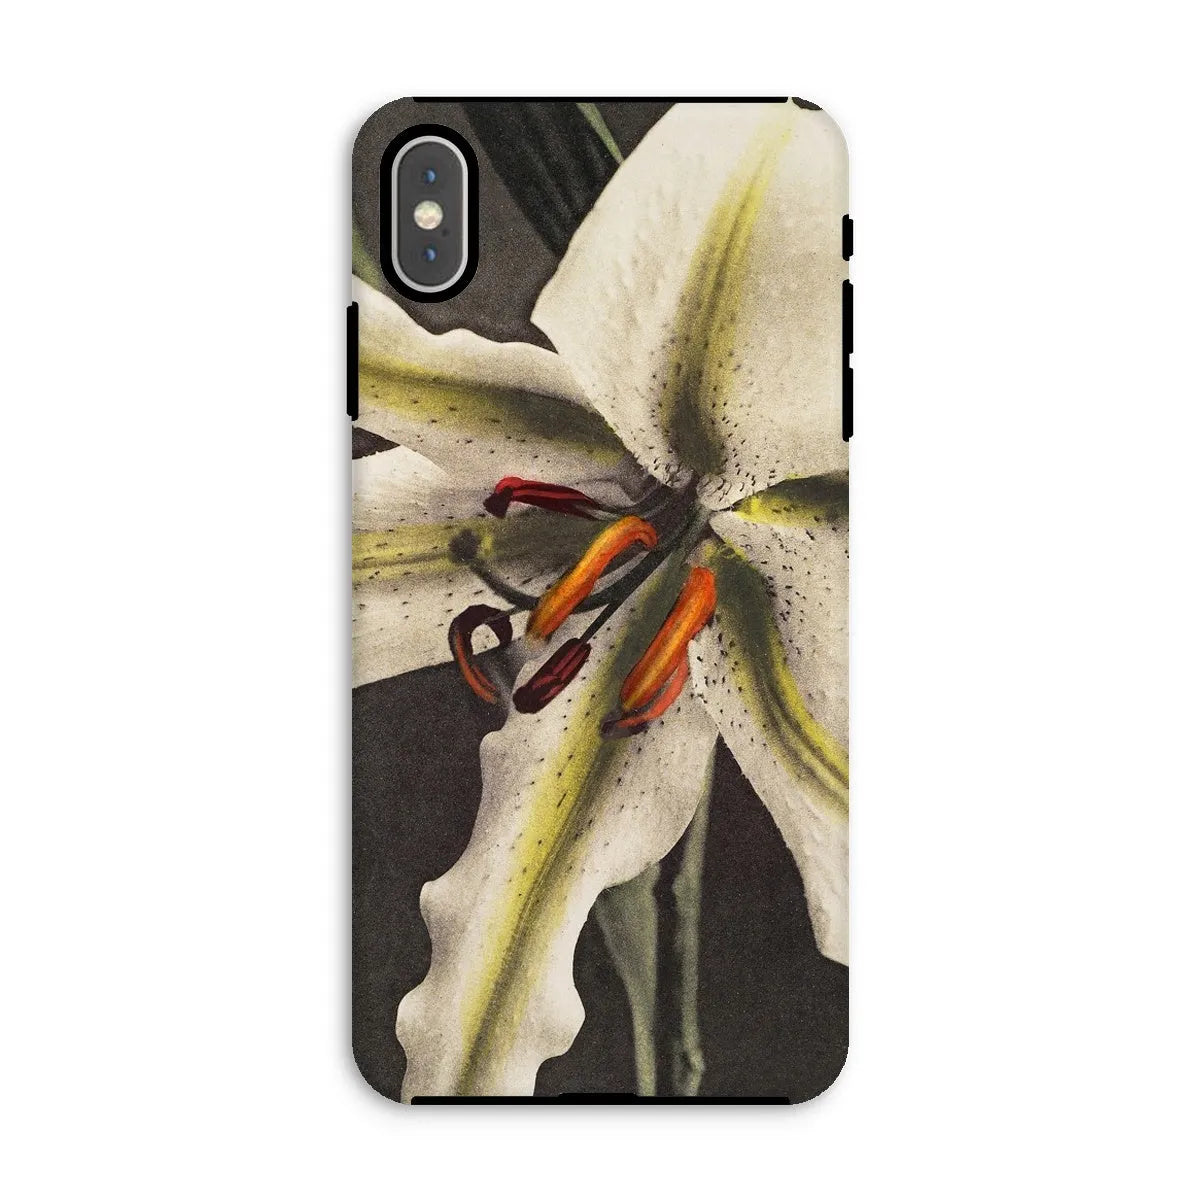 Lily By Kazumasa Ogawa Art Phone Case - Iphone Xs Max / Matte - Mobile Phone Cases - Aesthetic Art